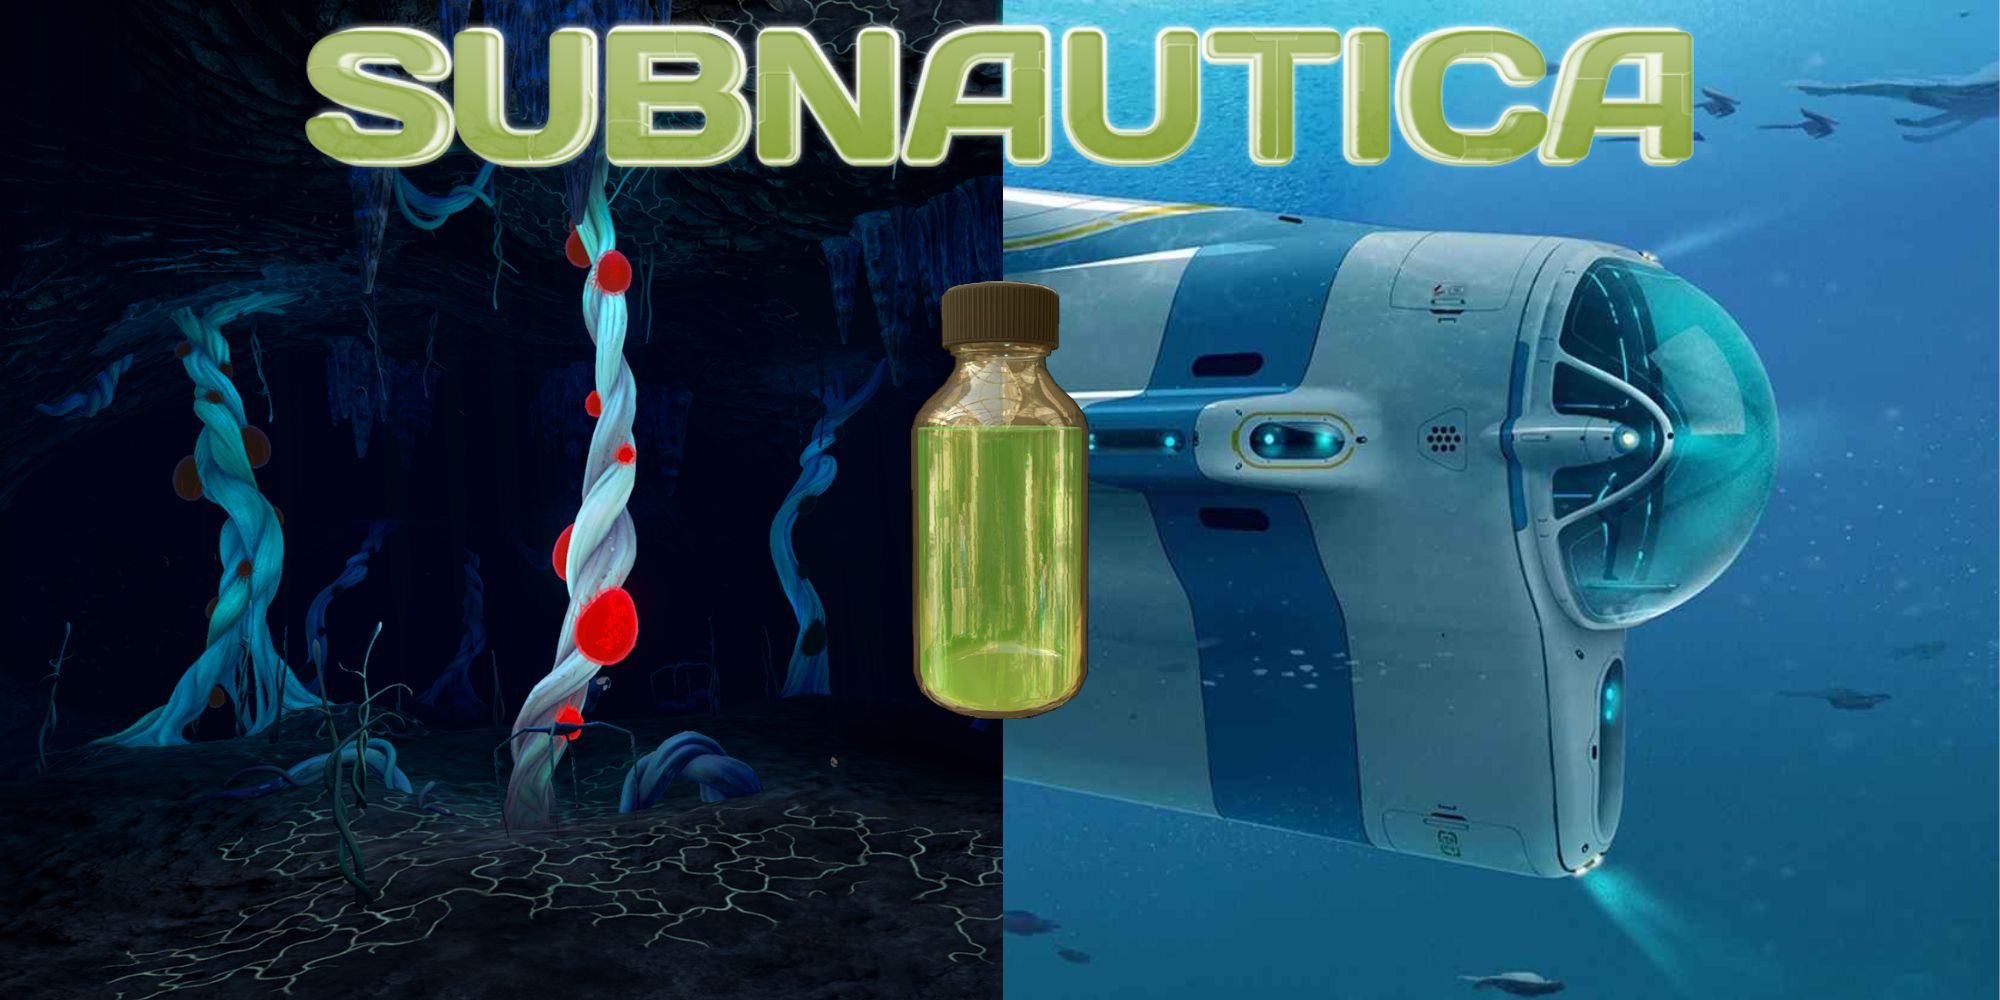 Subnautica Polyaniline over images of a reaper and the Cyclops